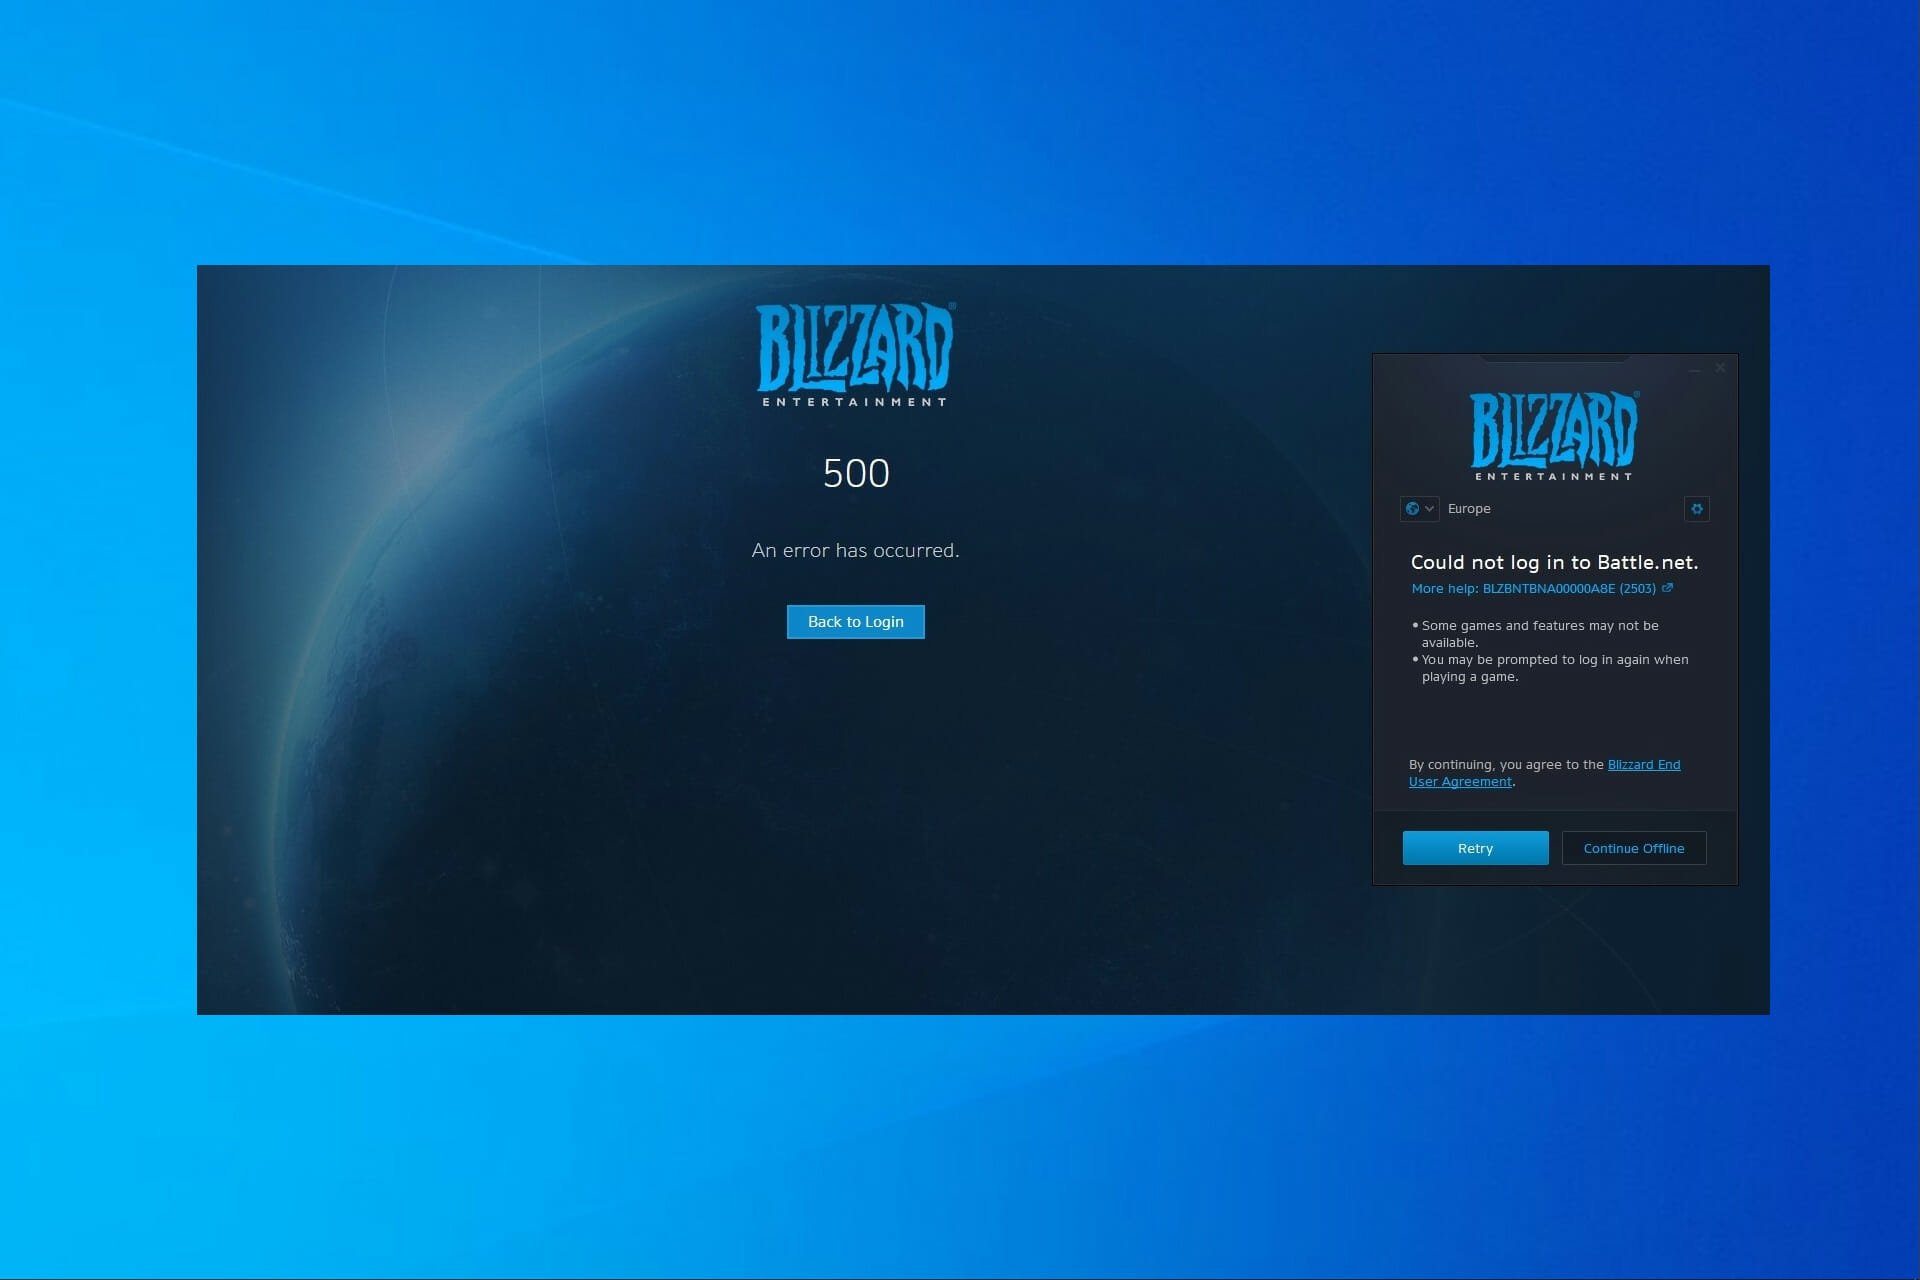 Cant start voice chat blizzard